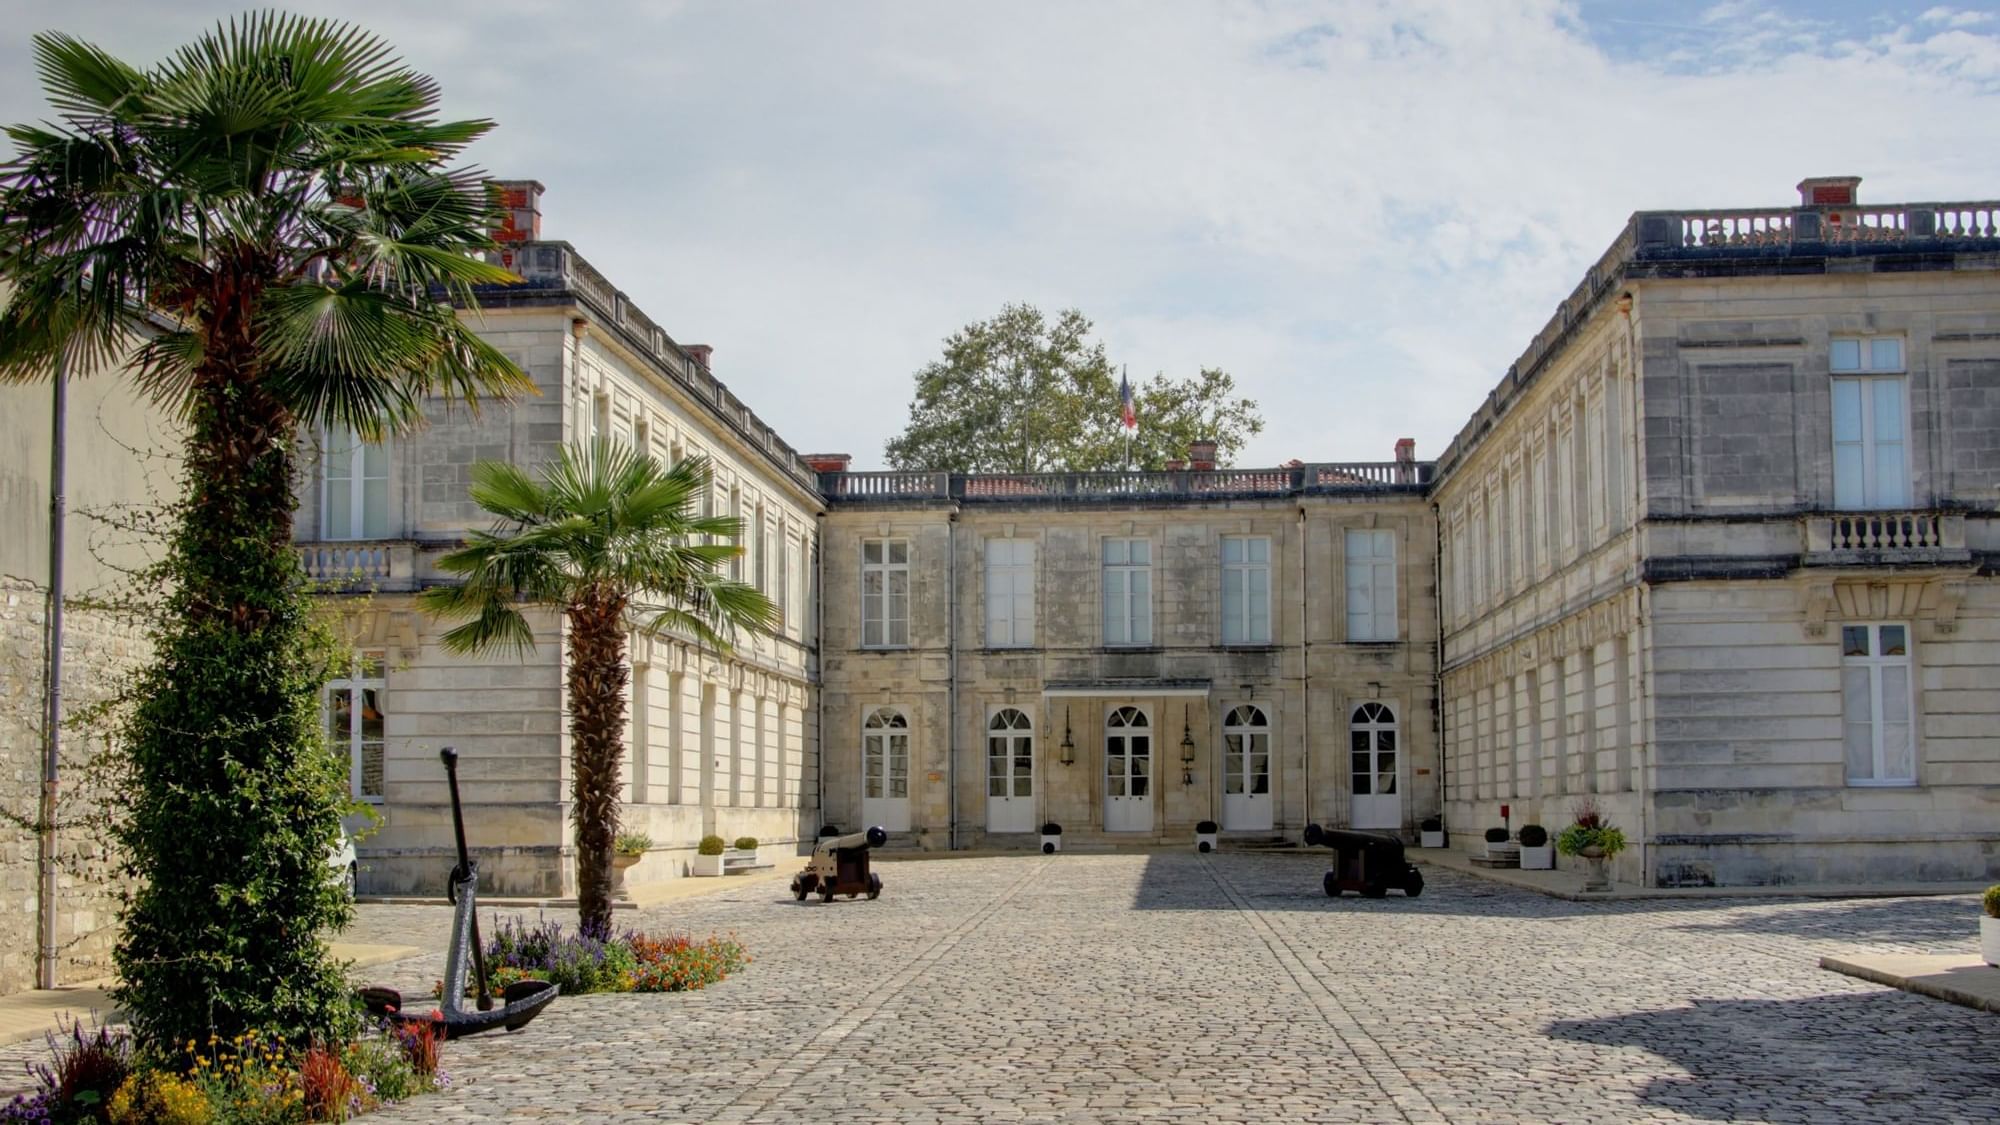 The Corderie Royale museum complex near the Originals Hotels